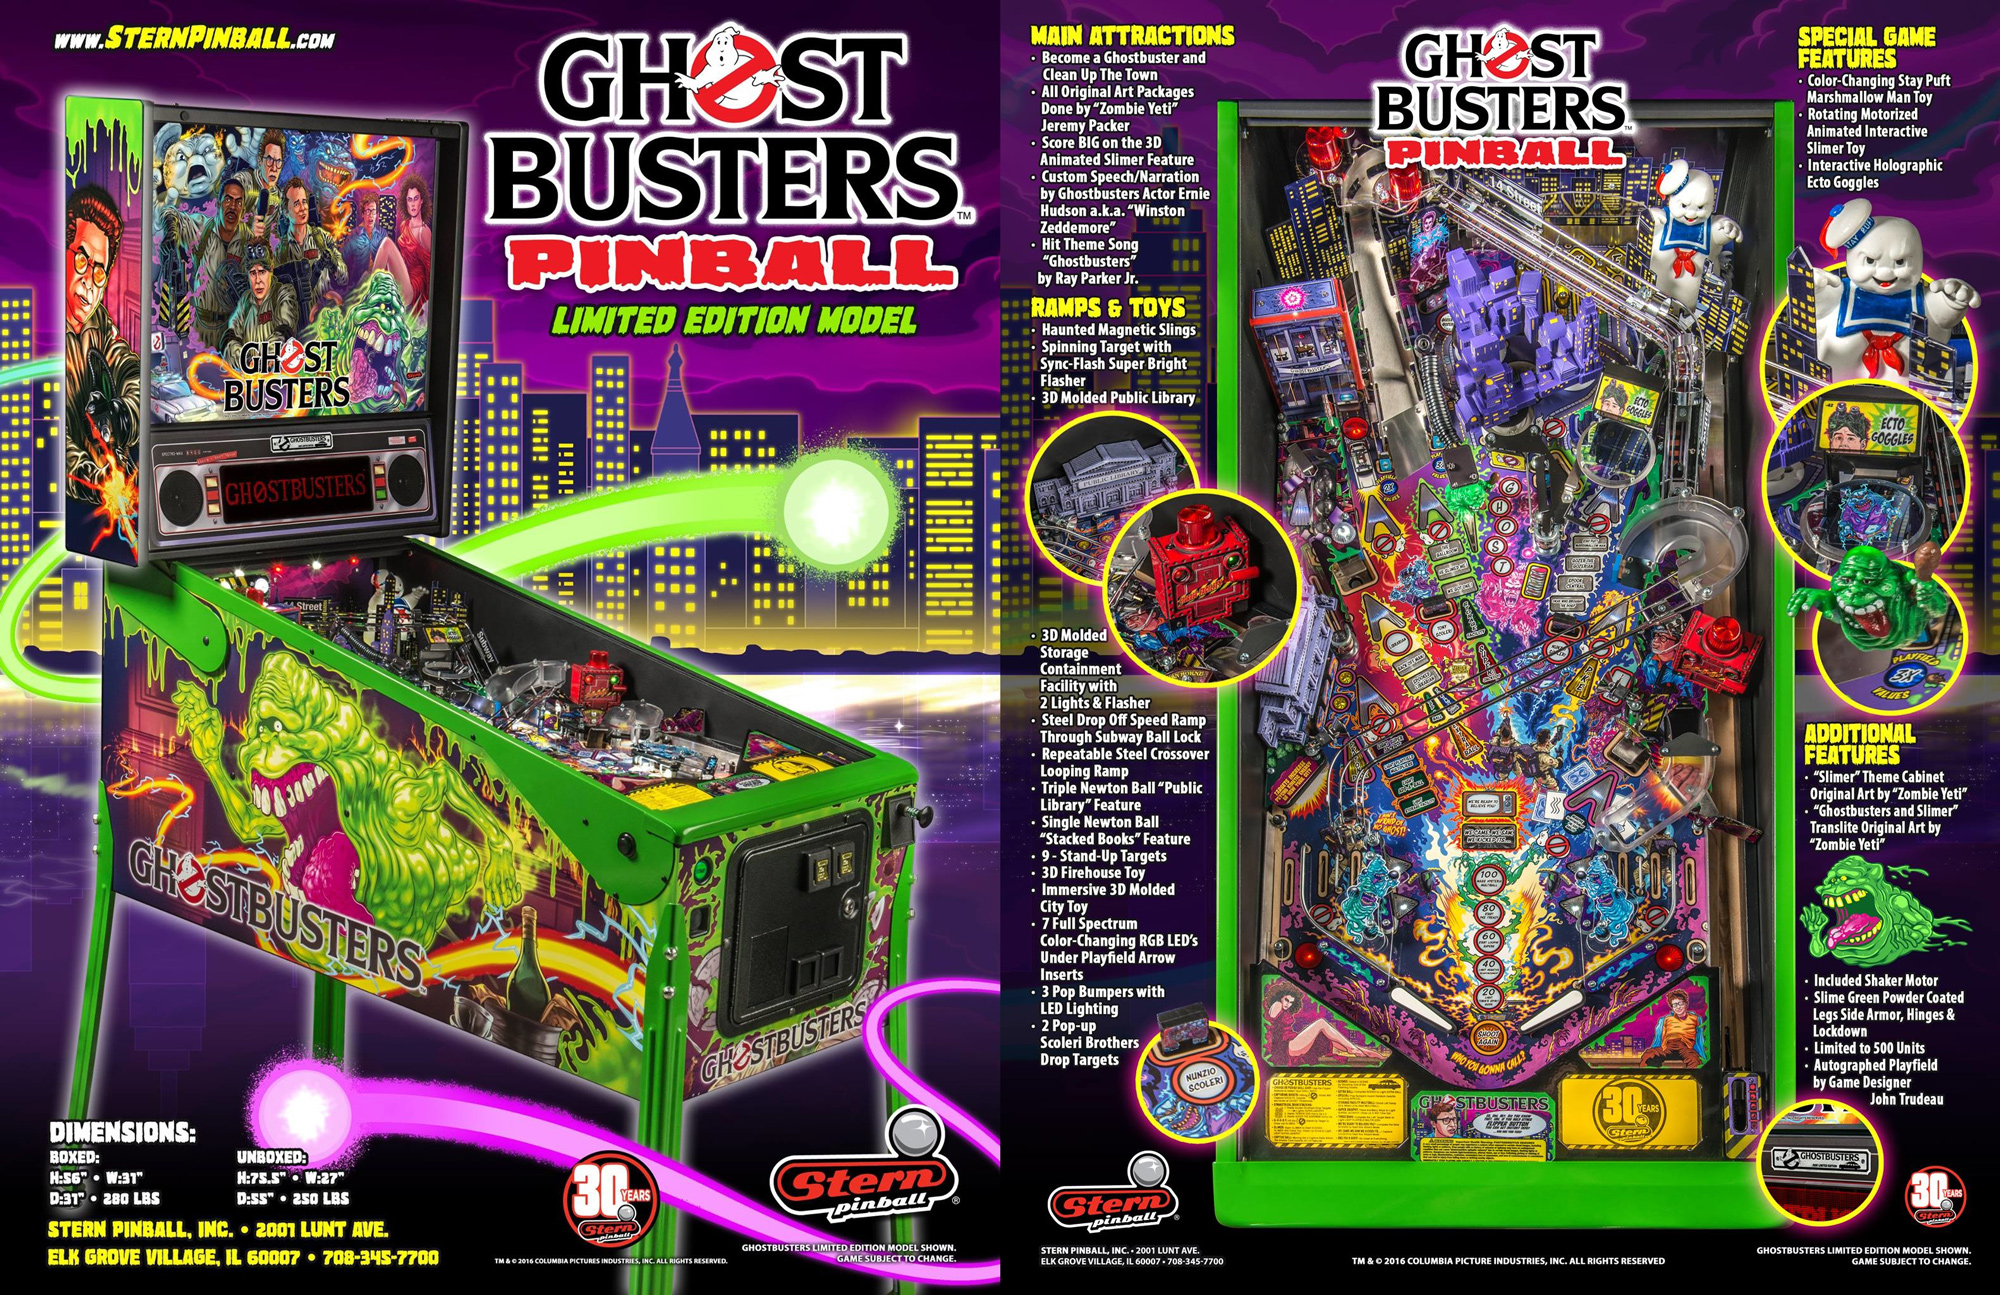 Ghostbusters-Limited-Edition-pinball-machine-flyer-stitched.jpg